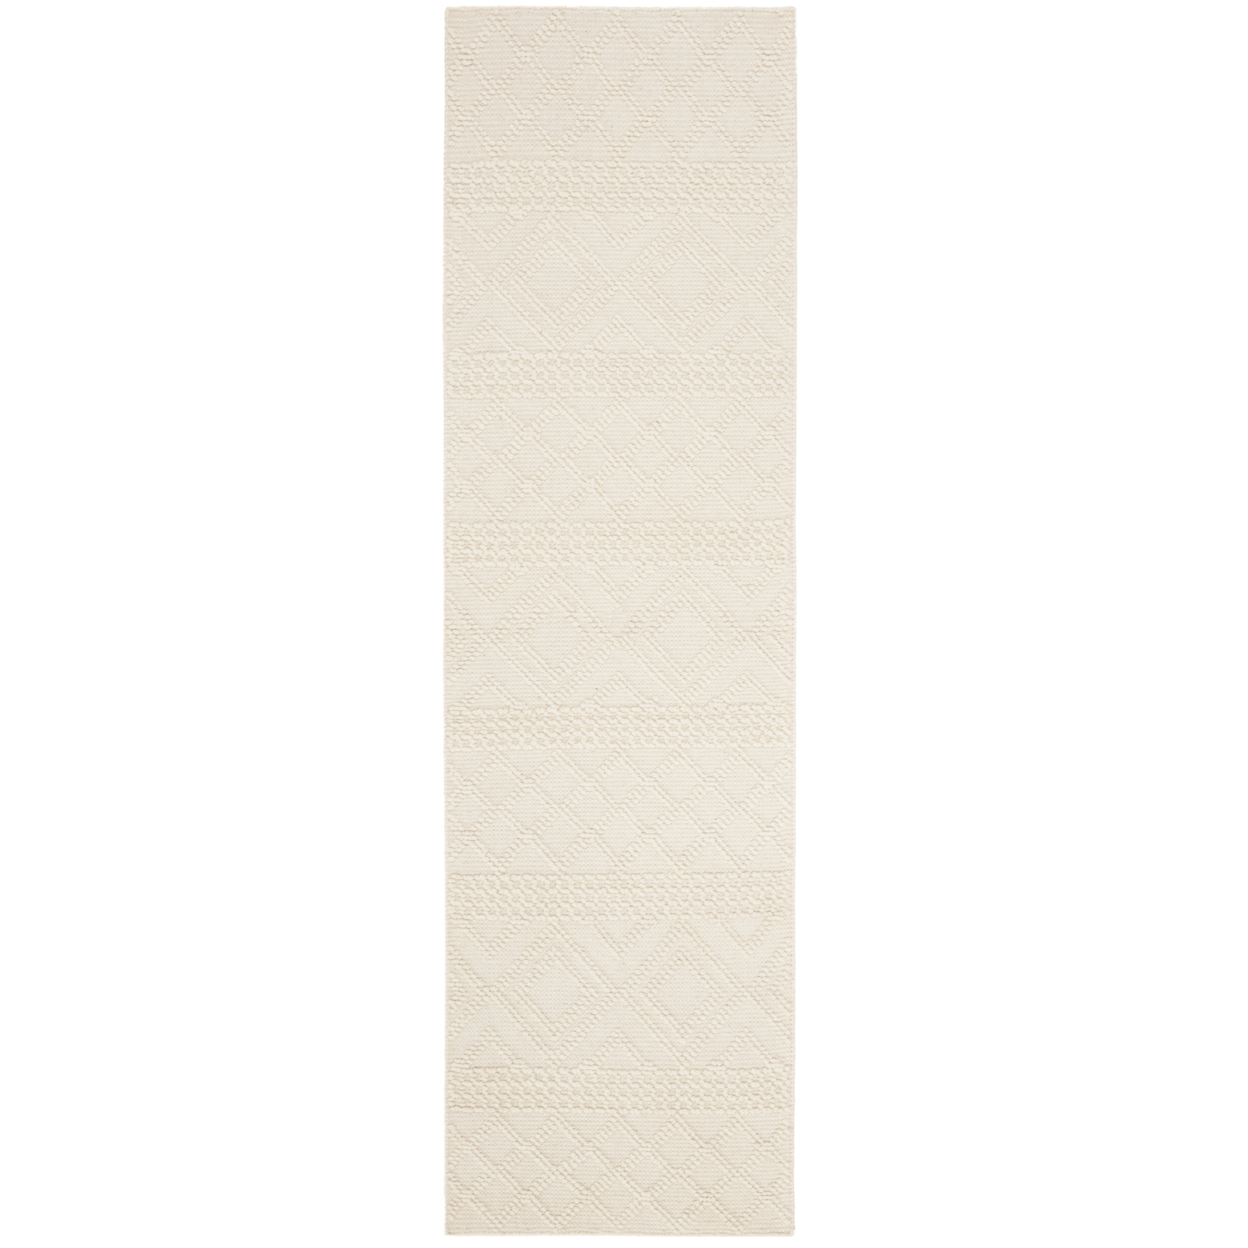 SAFAVIEH Vermont Collection VRM211A Handwoven Ivory Rug - 3 X 5